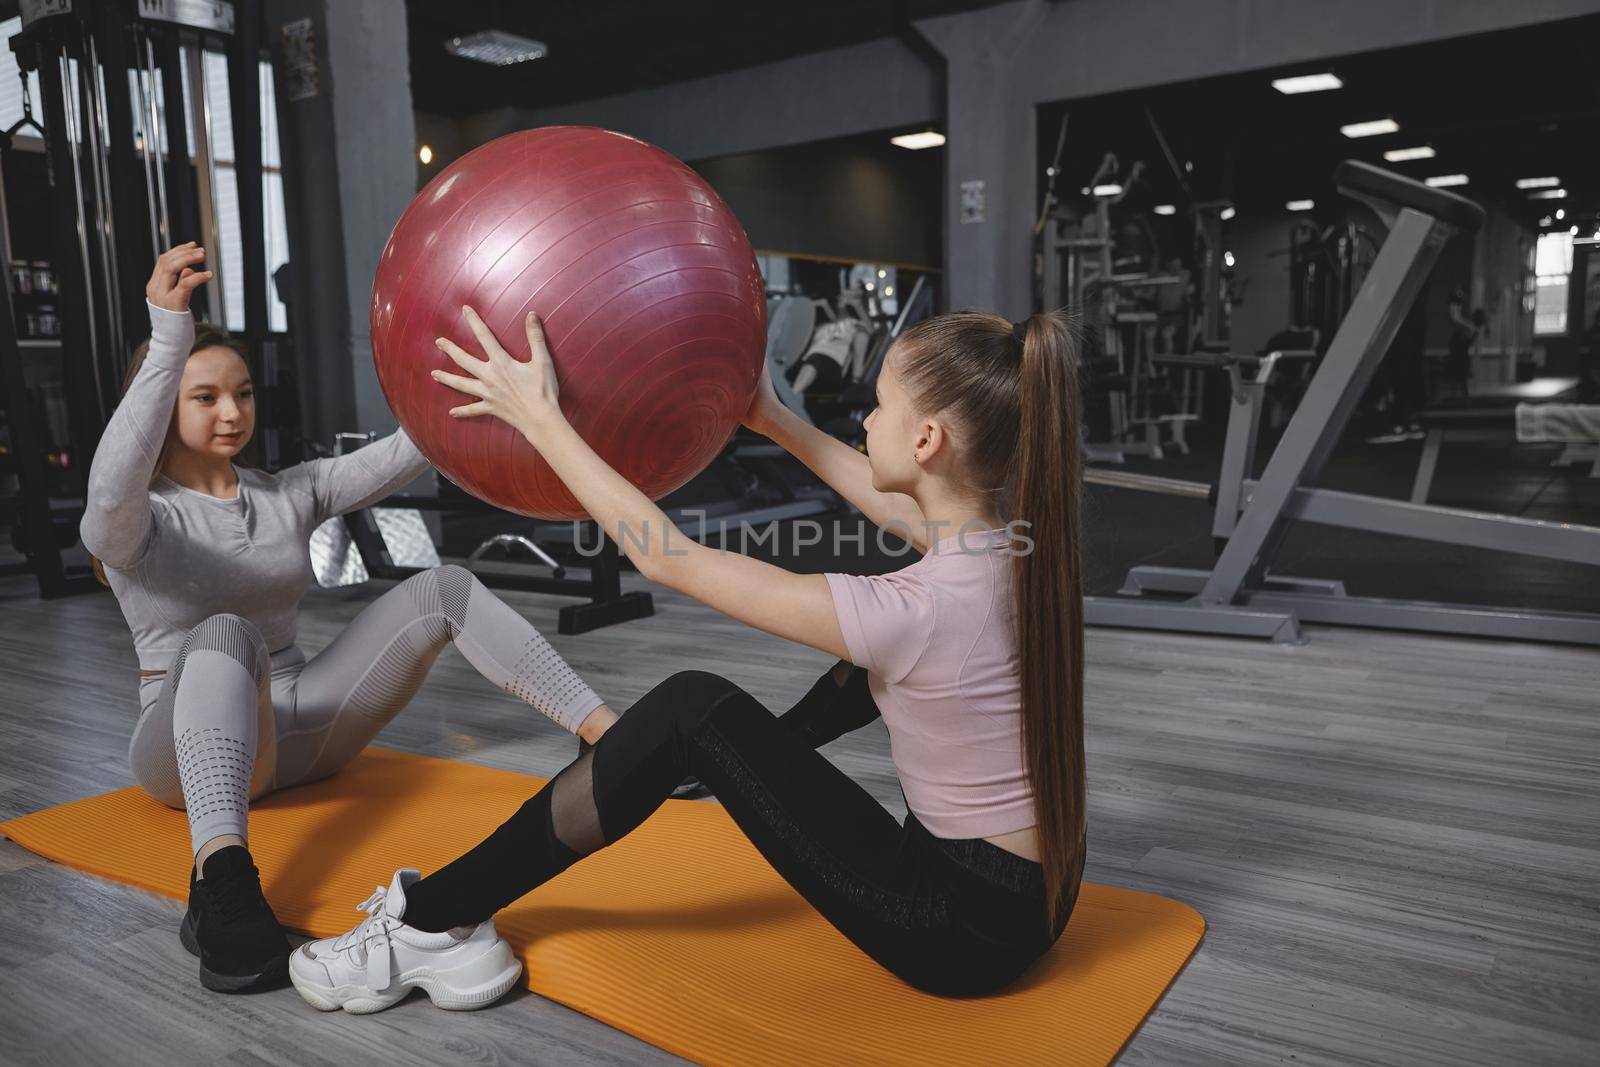 Teenage girl doing situps with fitness ball, exercising with personal trainer at the gym